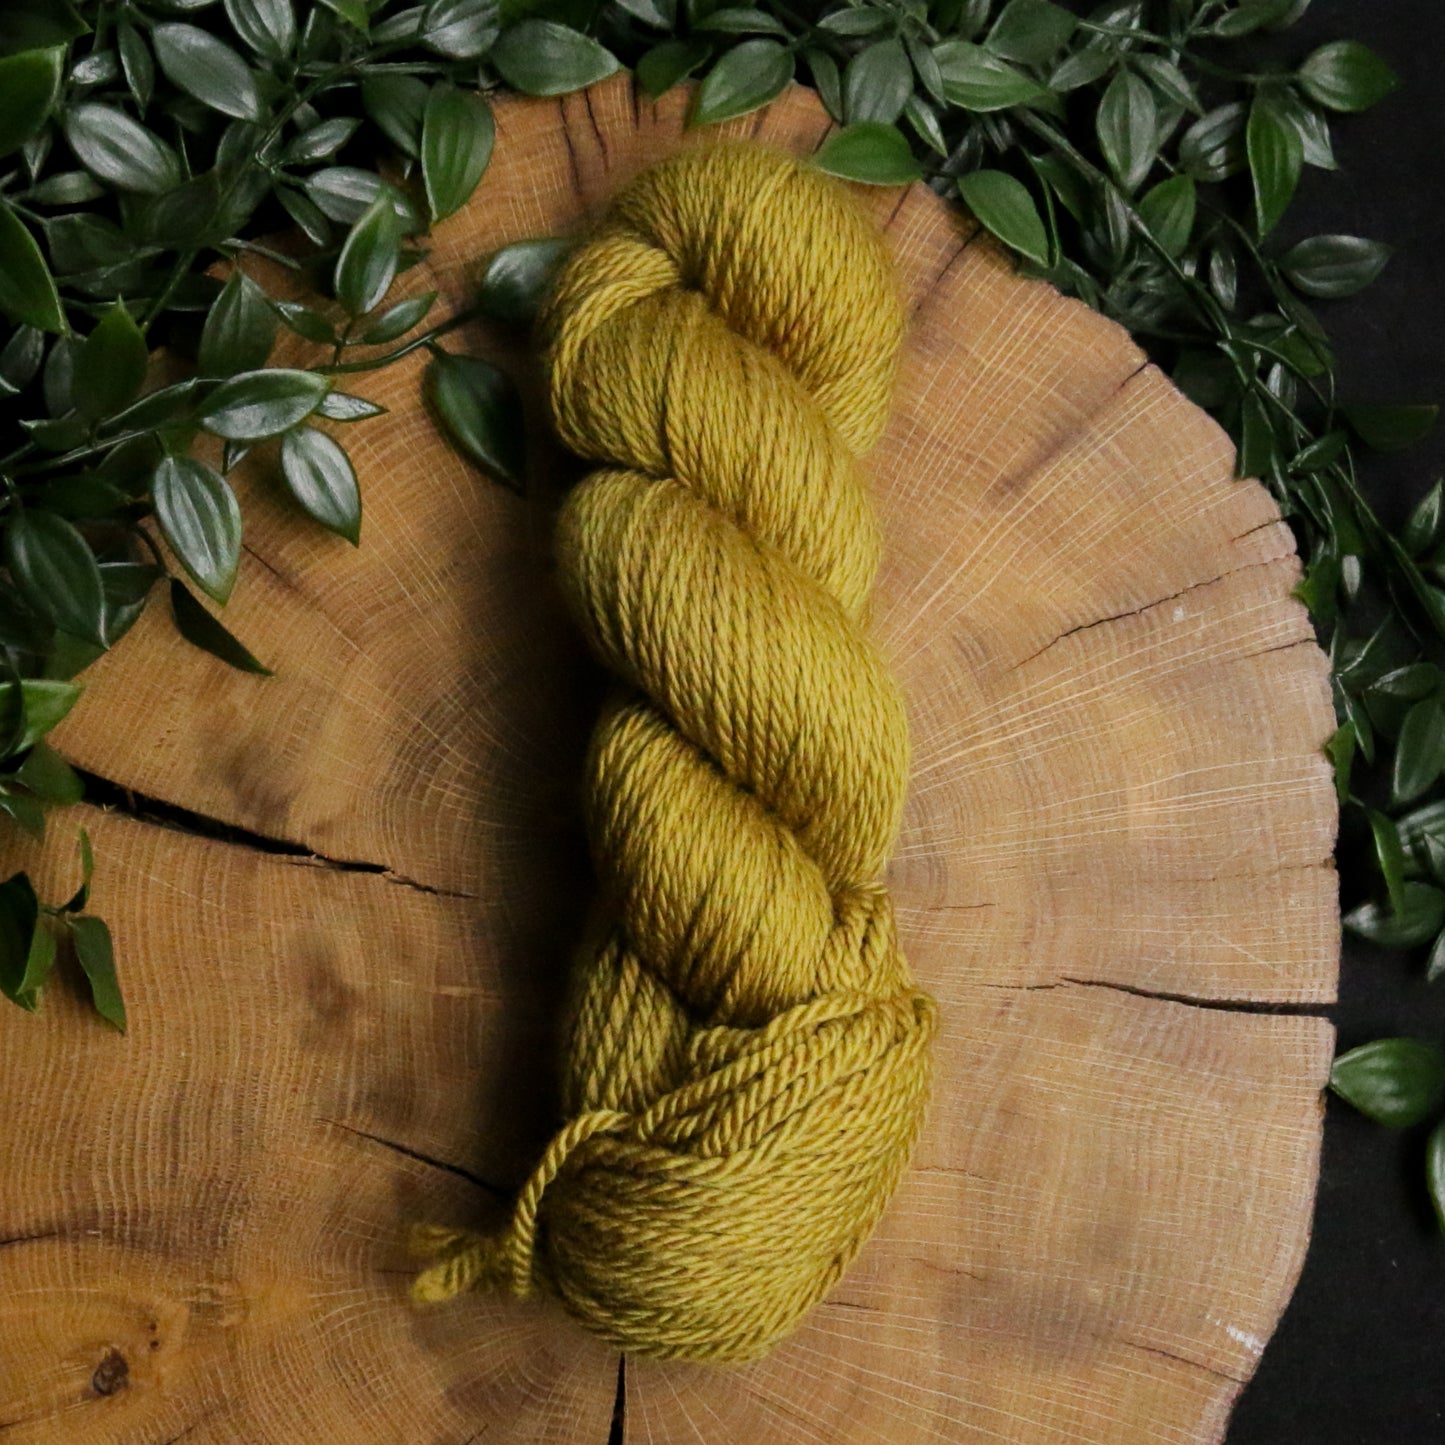 Decaying Leaves - Non-Superwash - Worsted Weight